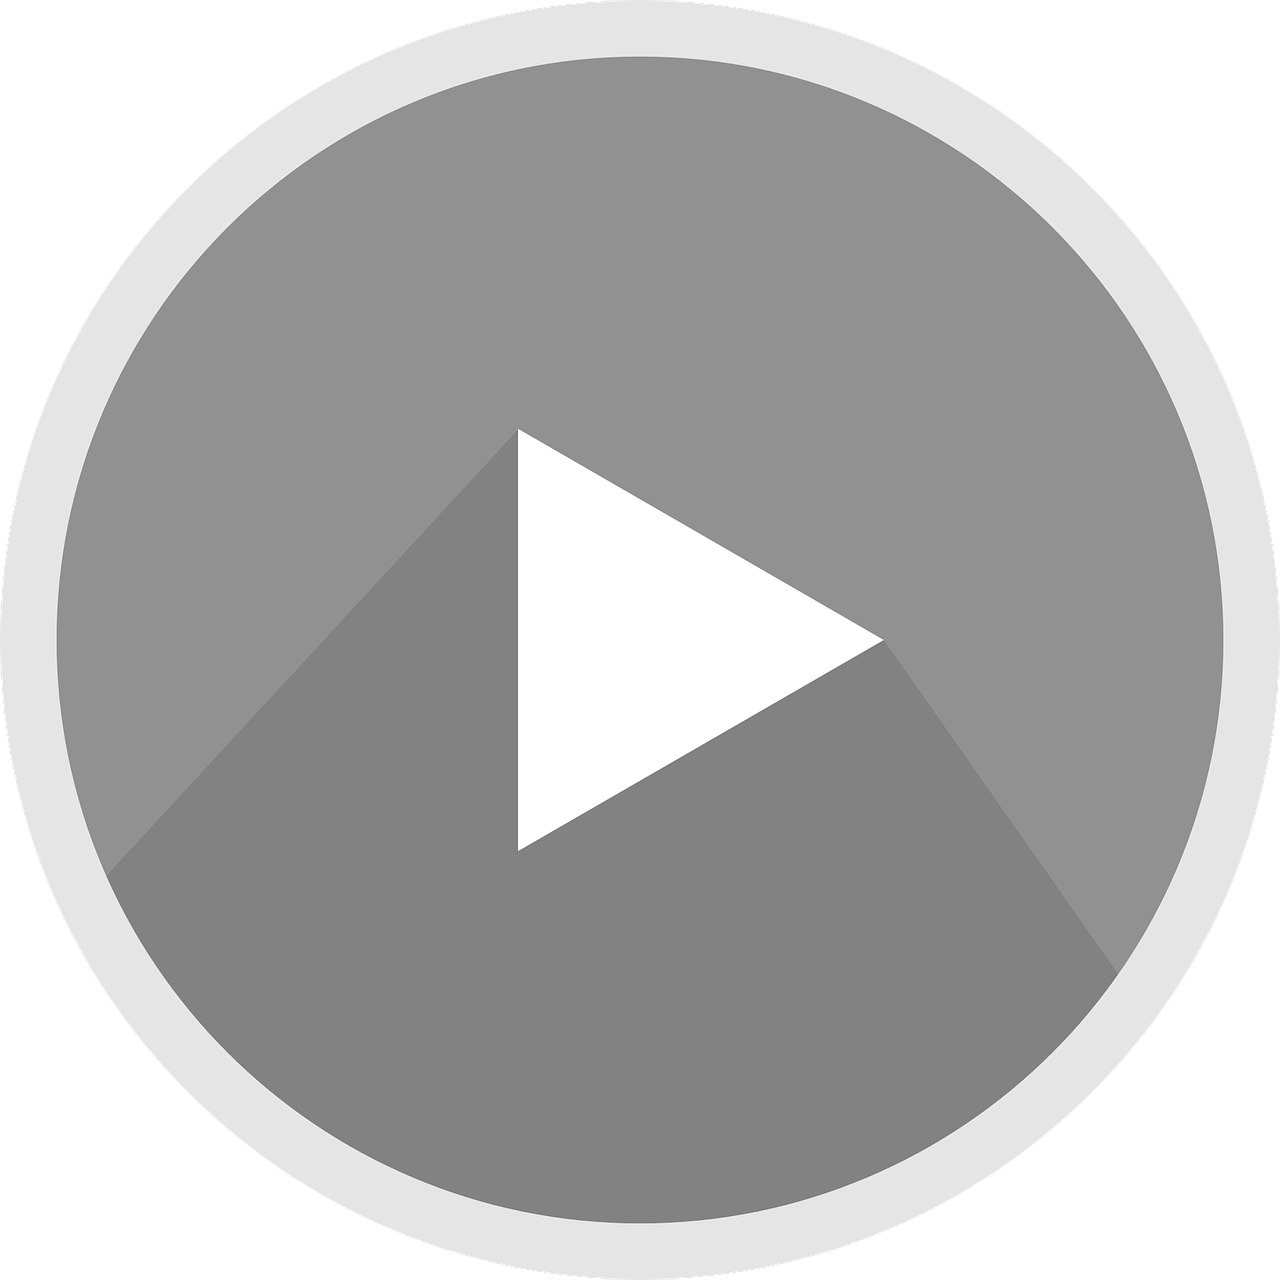 the-youtube-logo-3238901_1280.png